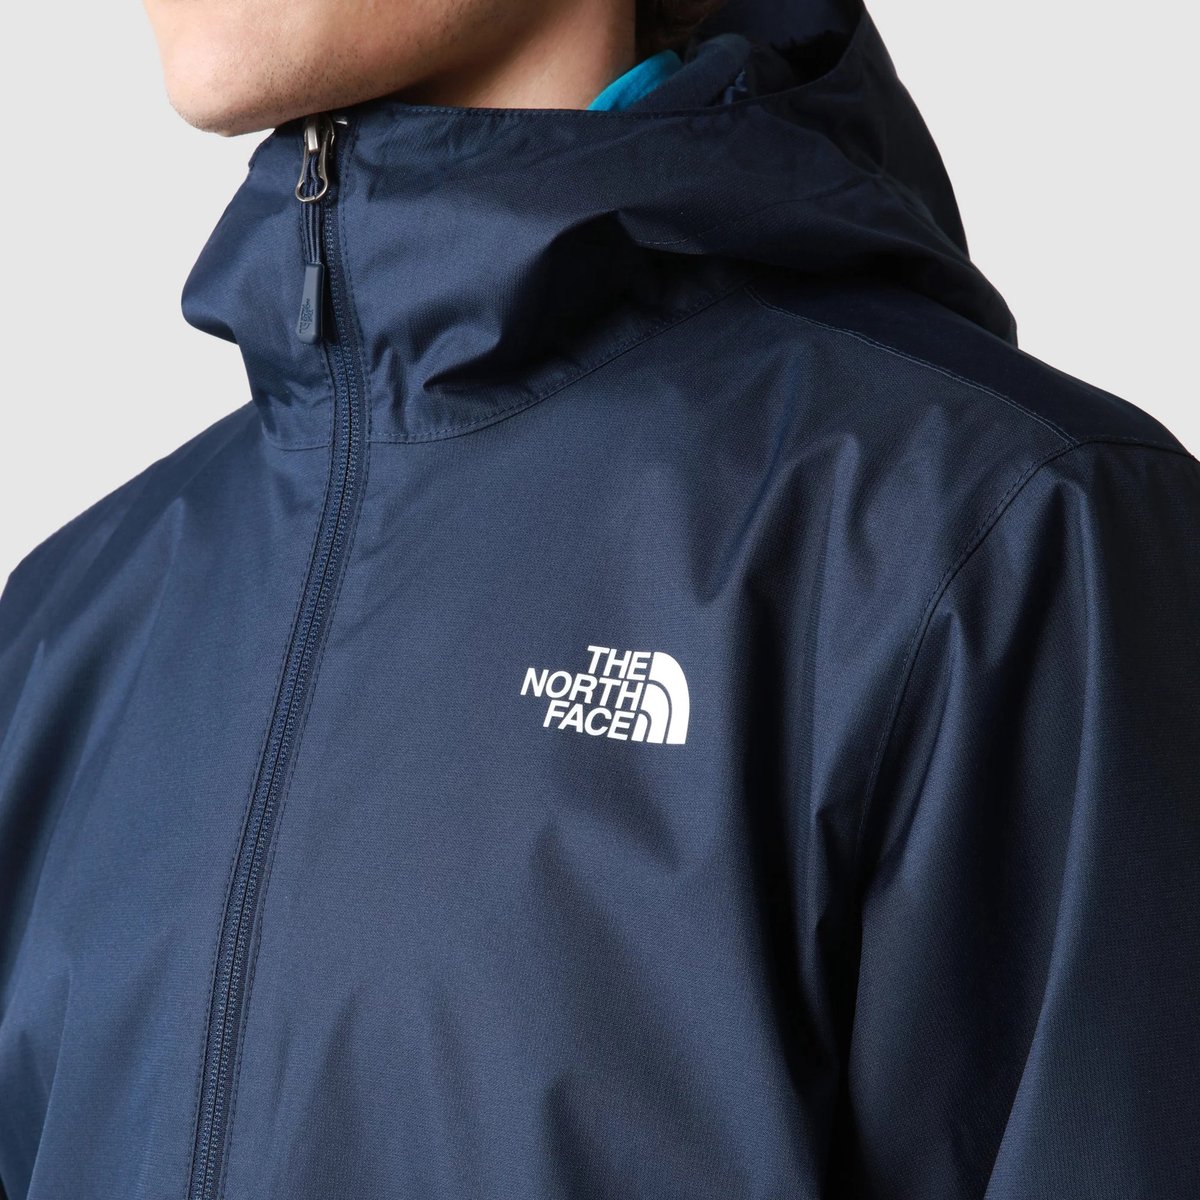 The North Face Quest Jas Mannen - Maat M | bol.